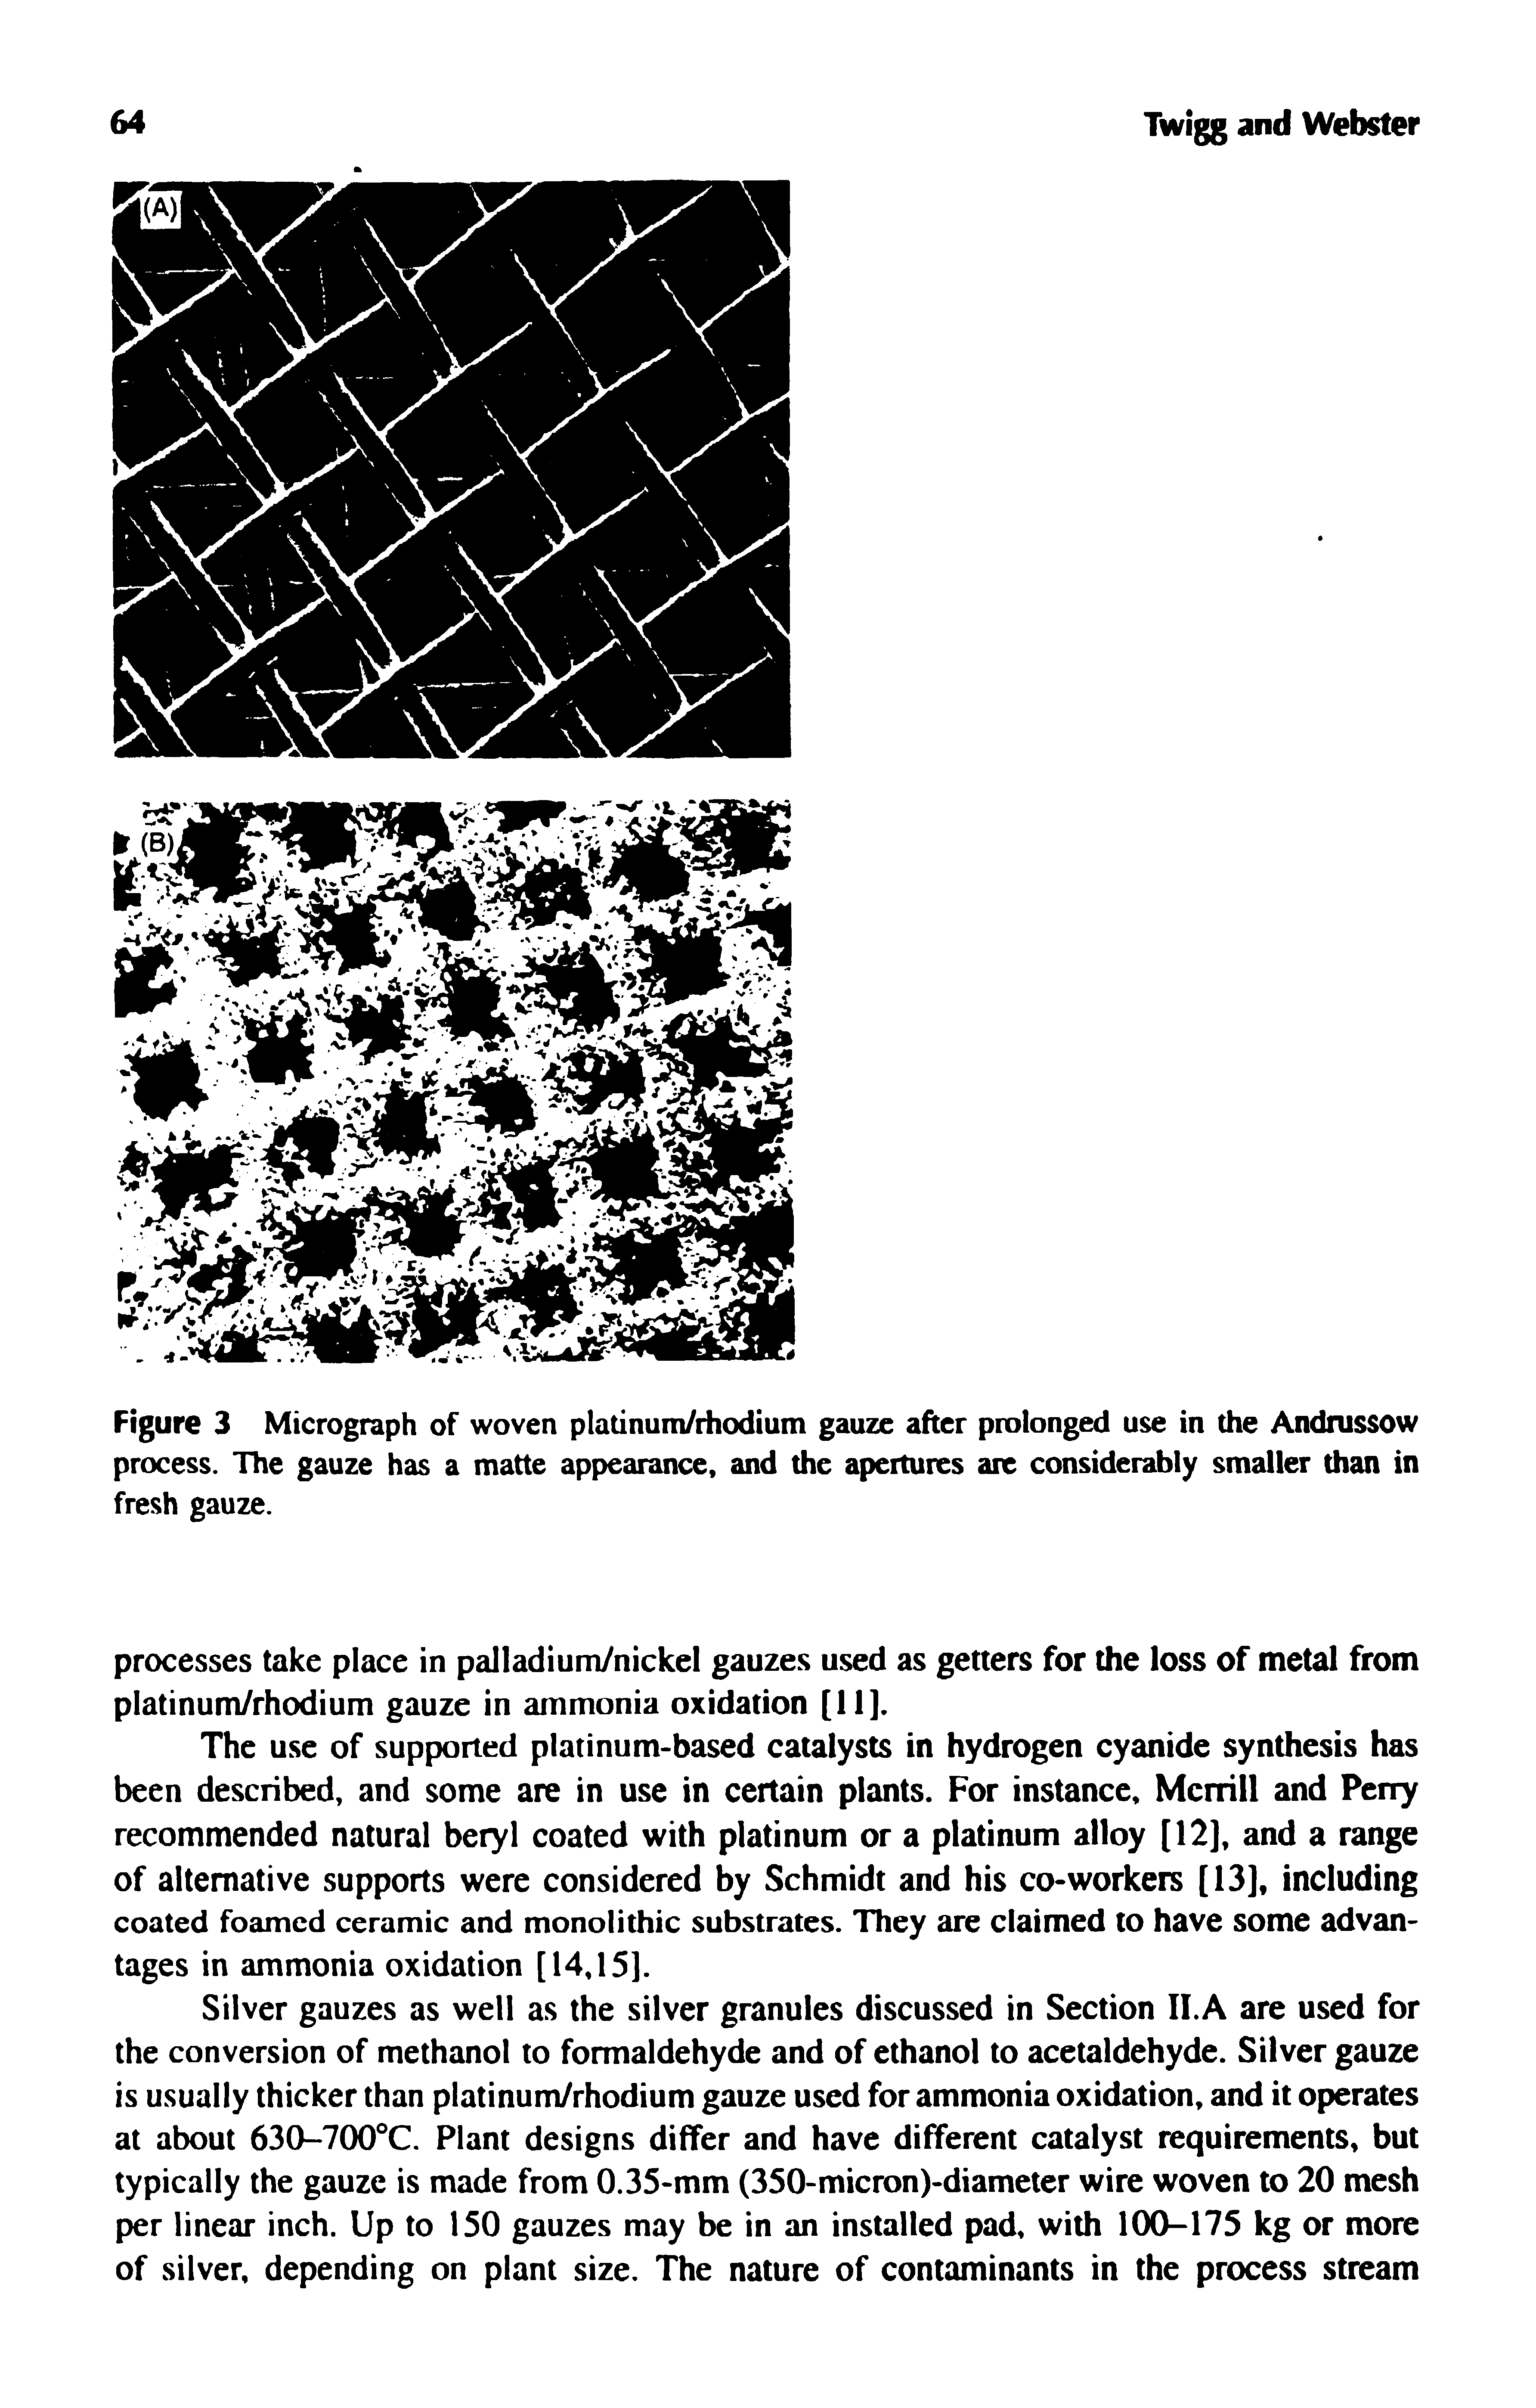 Figure 3 Micrograph of woven platinum/rhodium gauze after prolonged use in the Andrussow process. The gauze has a matte appearance, and the apertures are considerably smaller than in fresh gauze.